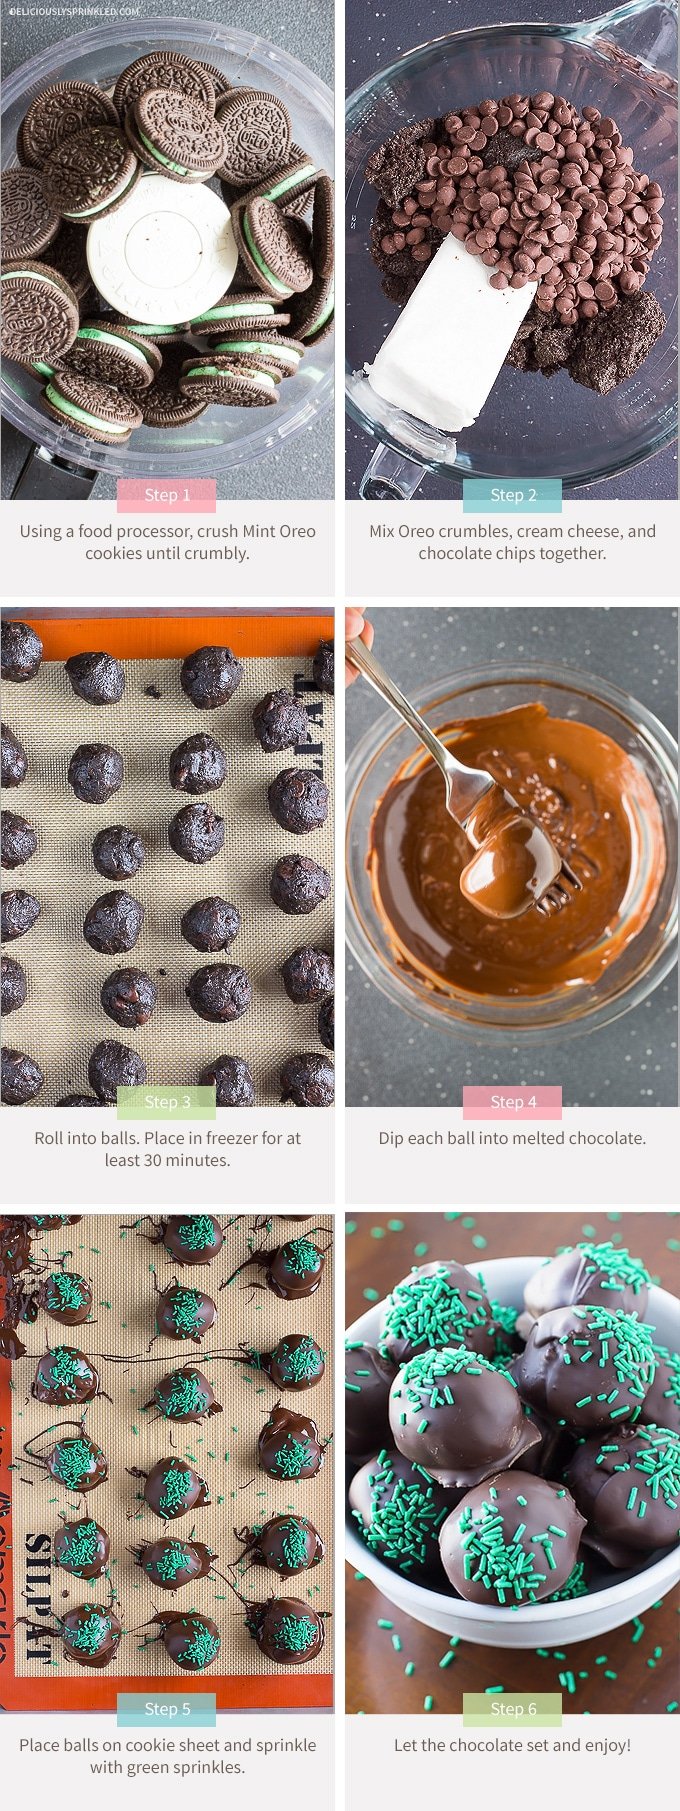 Step by Step guide to making Mint Oreo Truffles